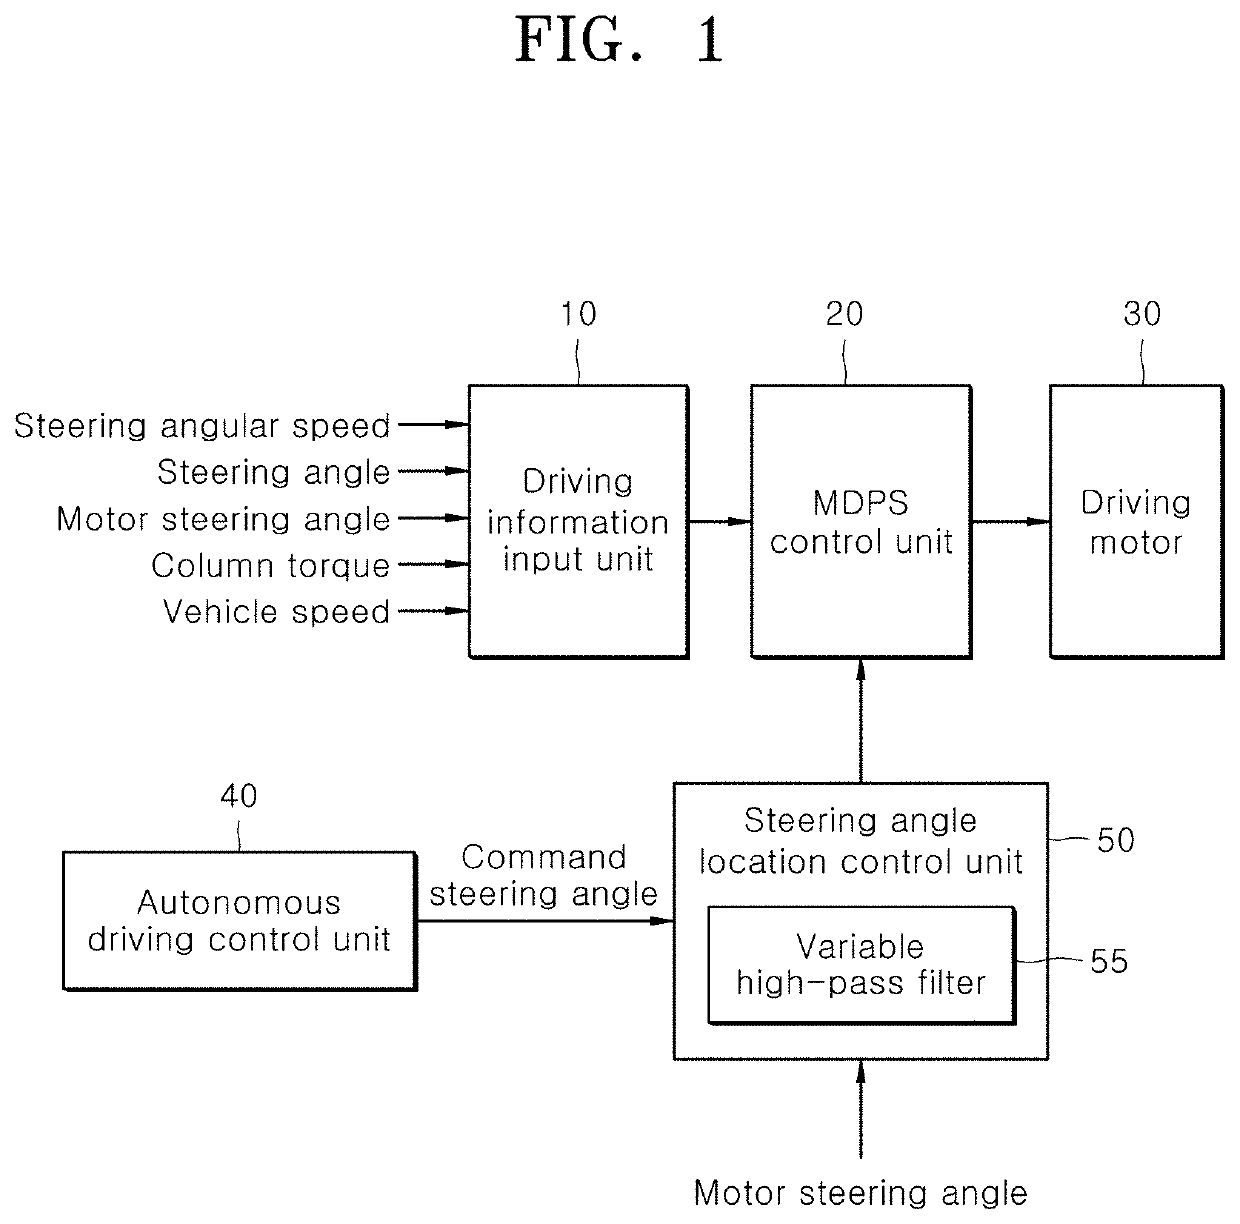 Apparatus and method for controlling motor-driven power steering apparatus